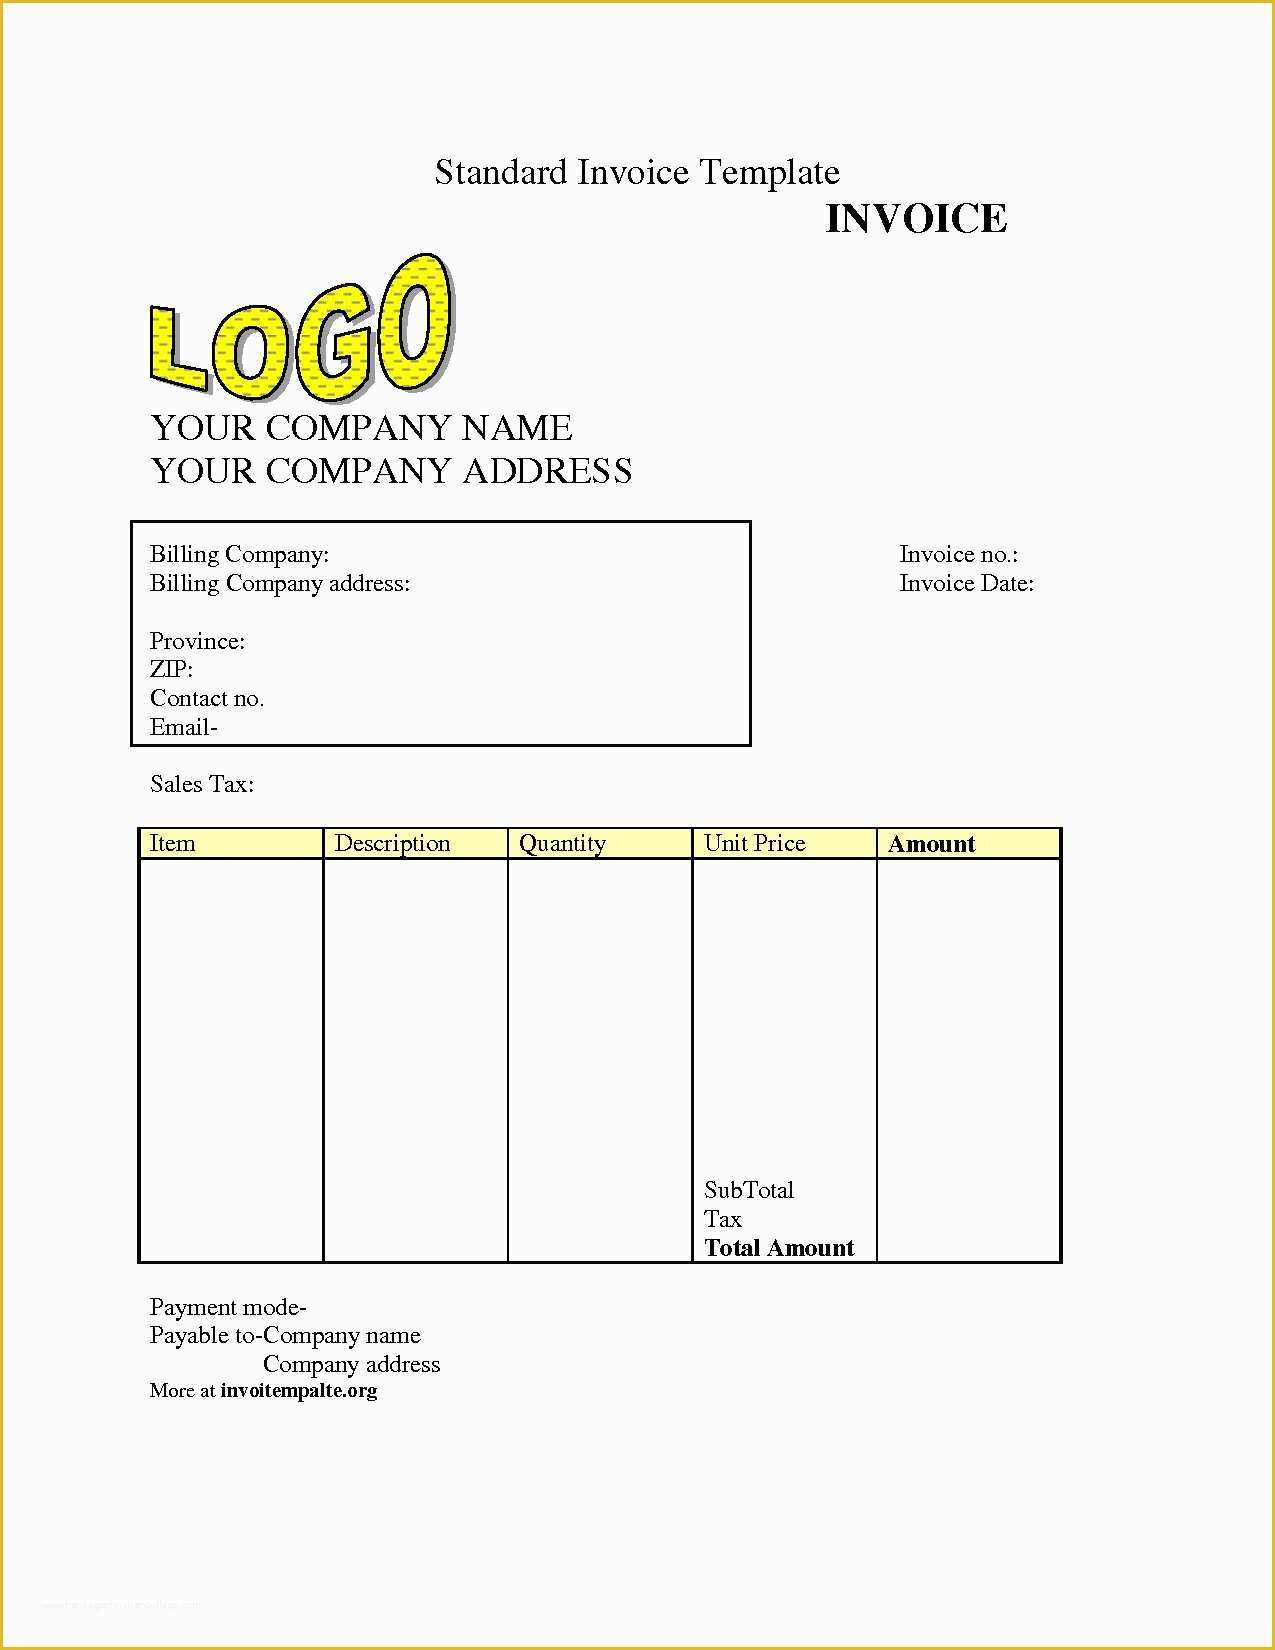 Invoice Template Free Download Windows Of Free Invoice Template Downloads Invoice Template Ideas